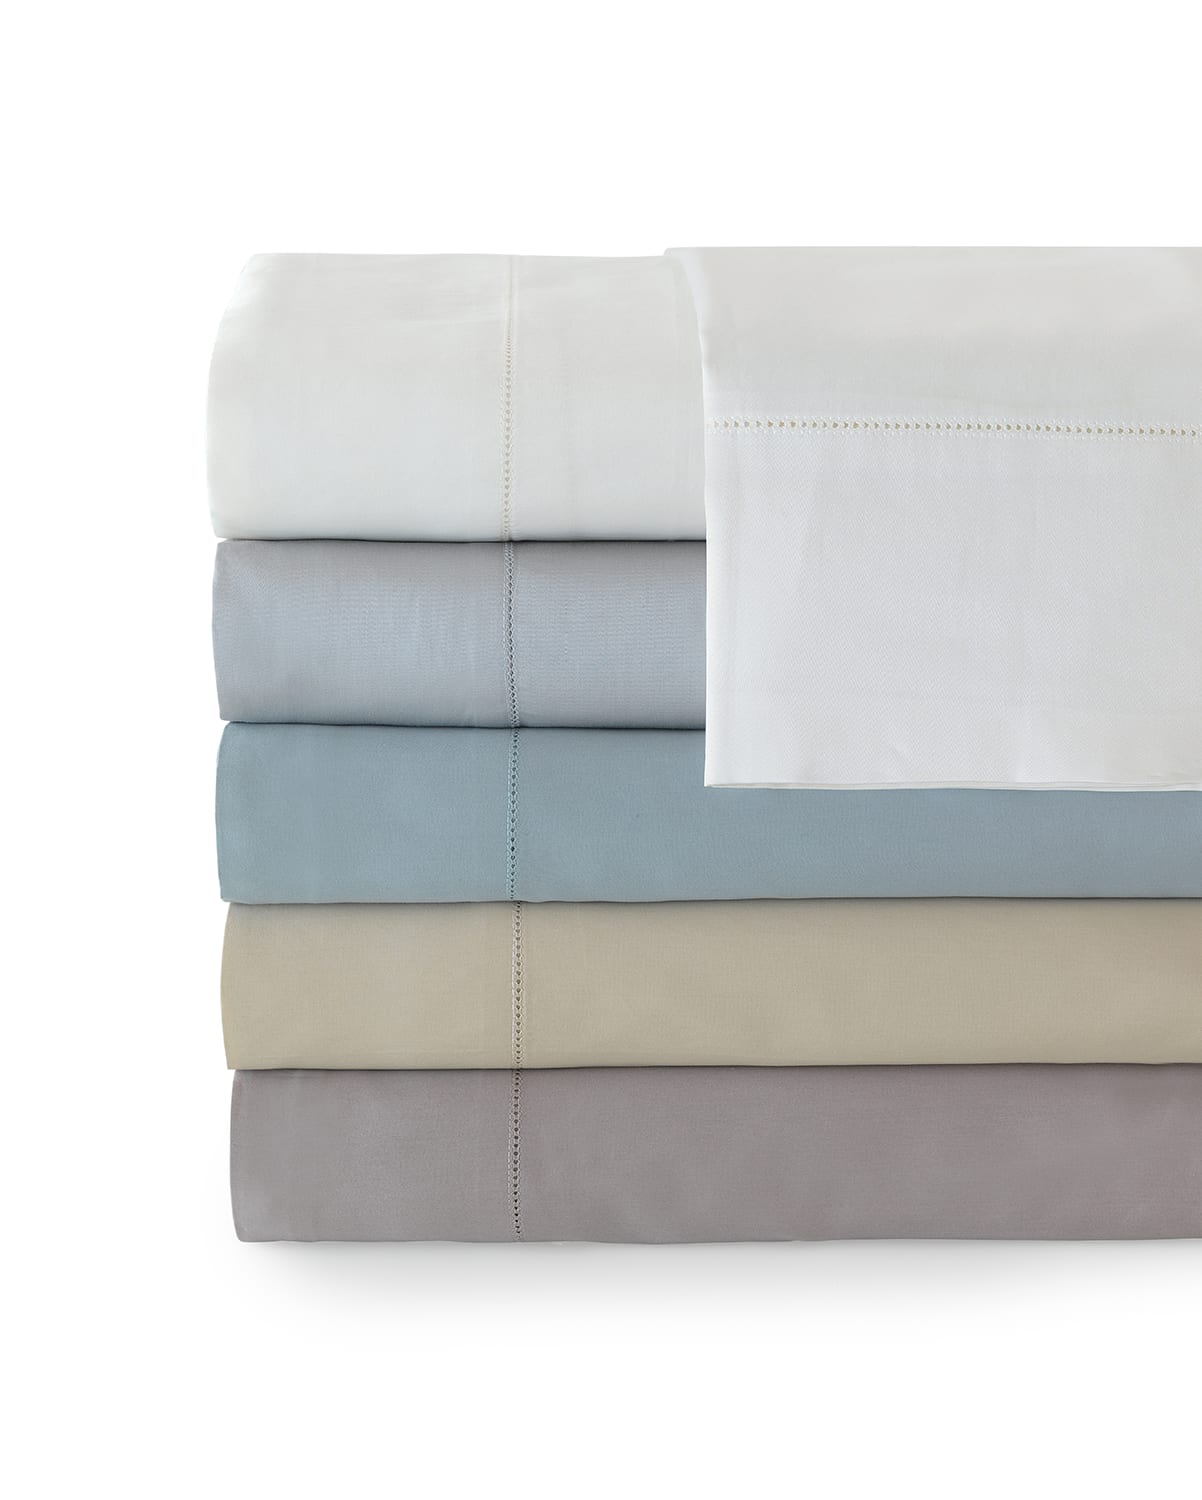 Image Eastern Accents King 300 Thread Count Fitted Sheet